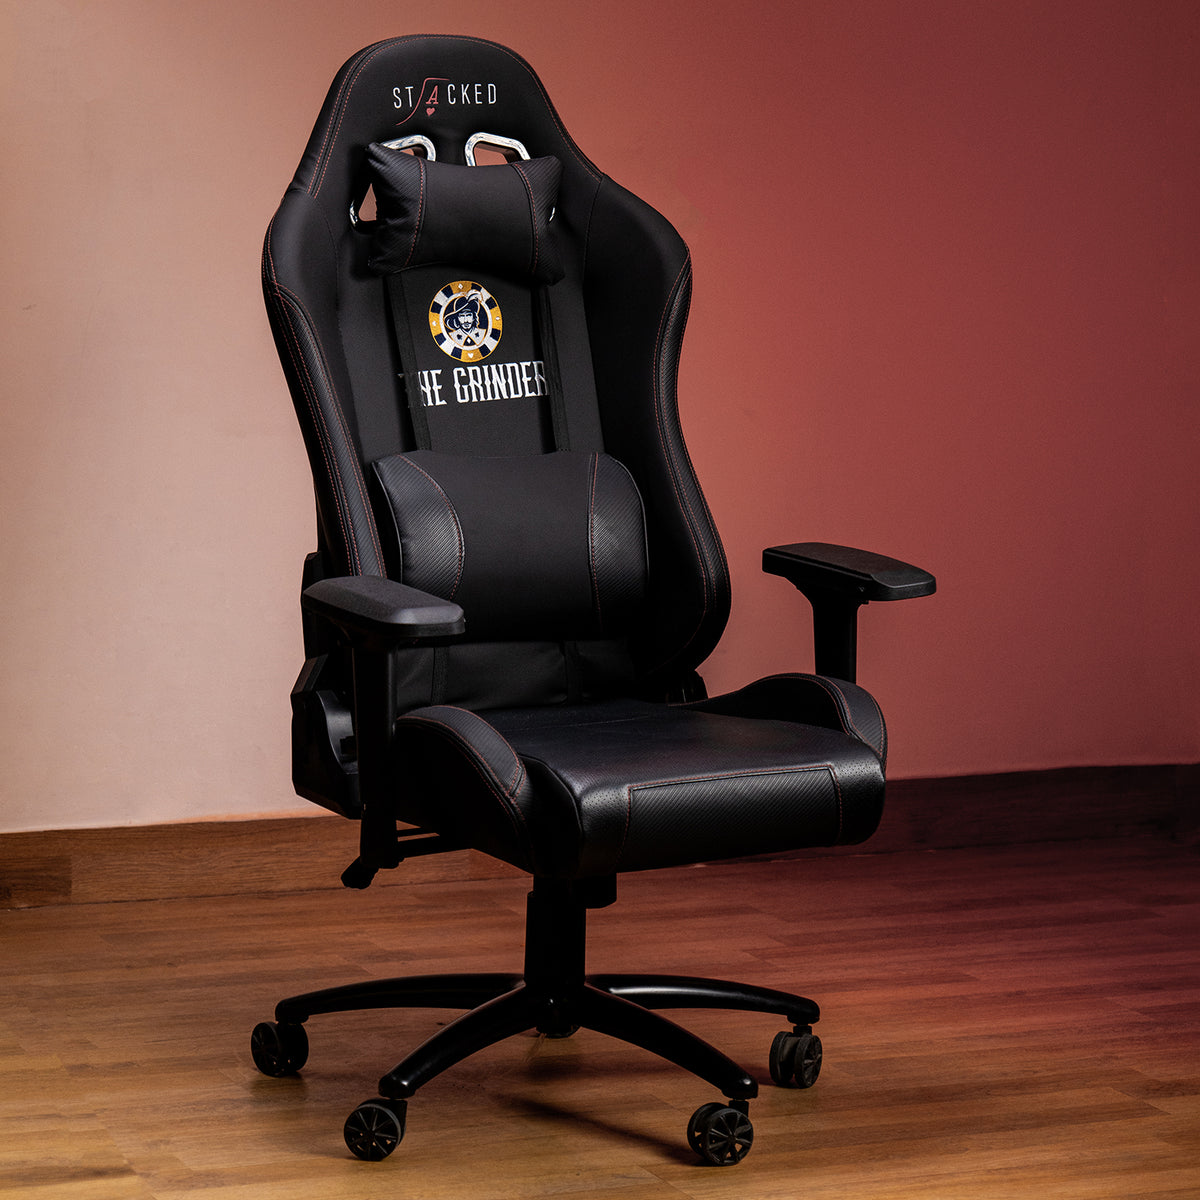 Buy Carbon X Pro Gaming Chair Grinder Series, Black at Astrix